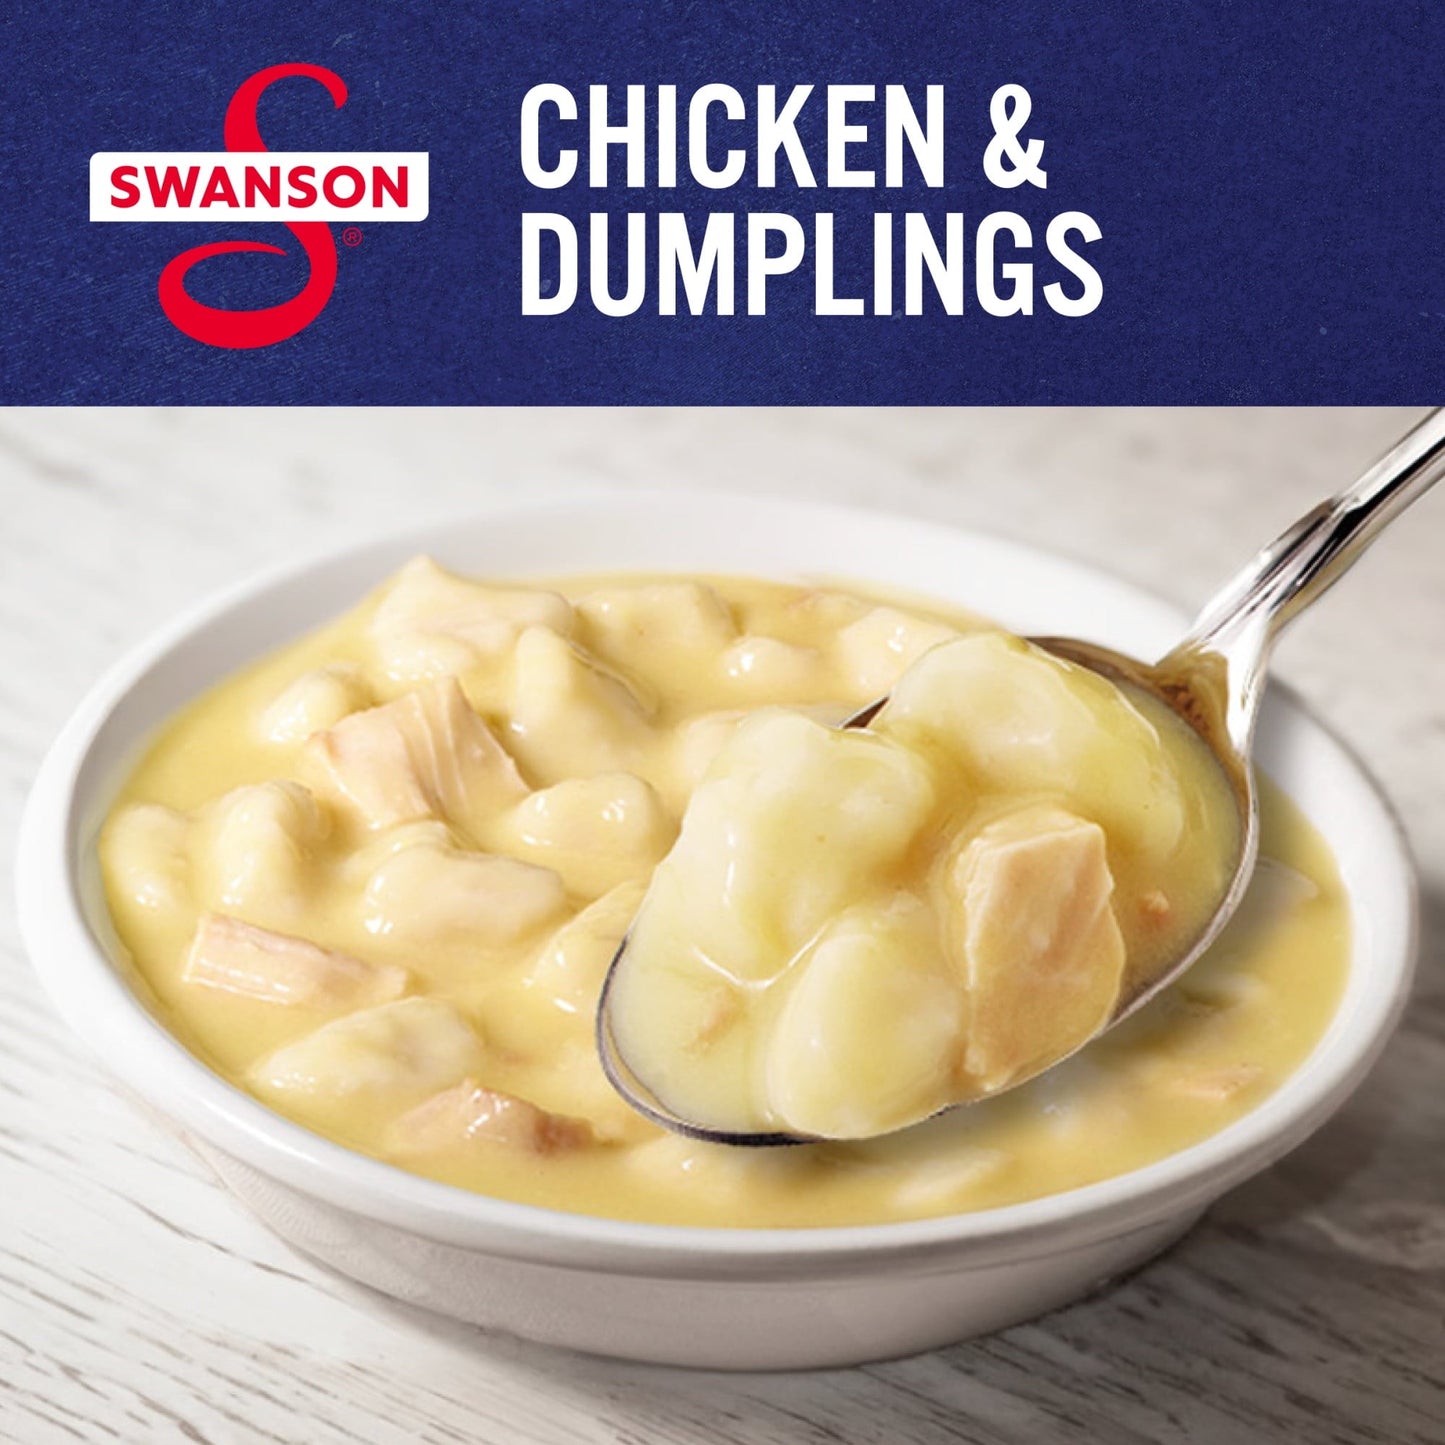 Swanson Canned Chicken and Dumplings with White and Dark Chicken Meat, 10.5 oz Can